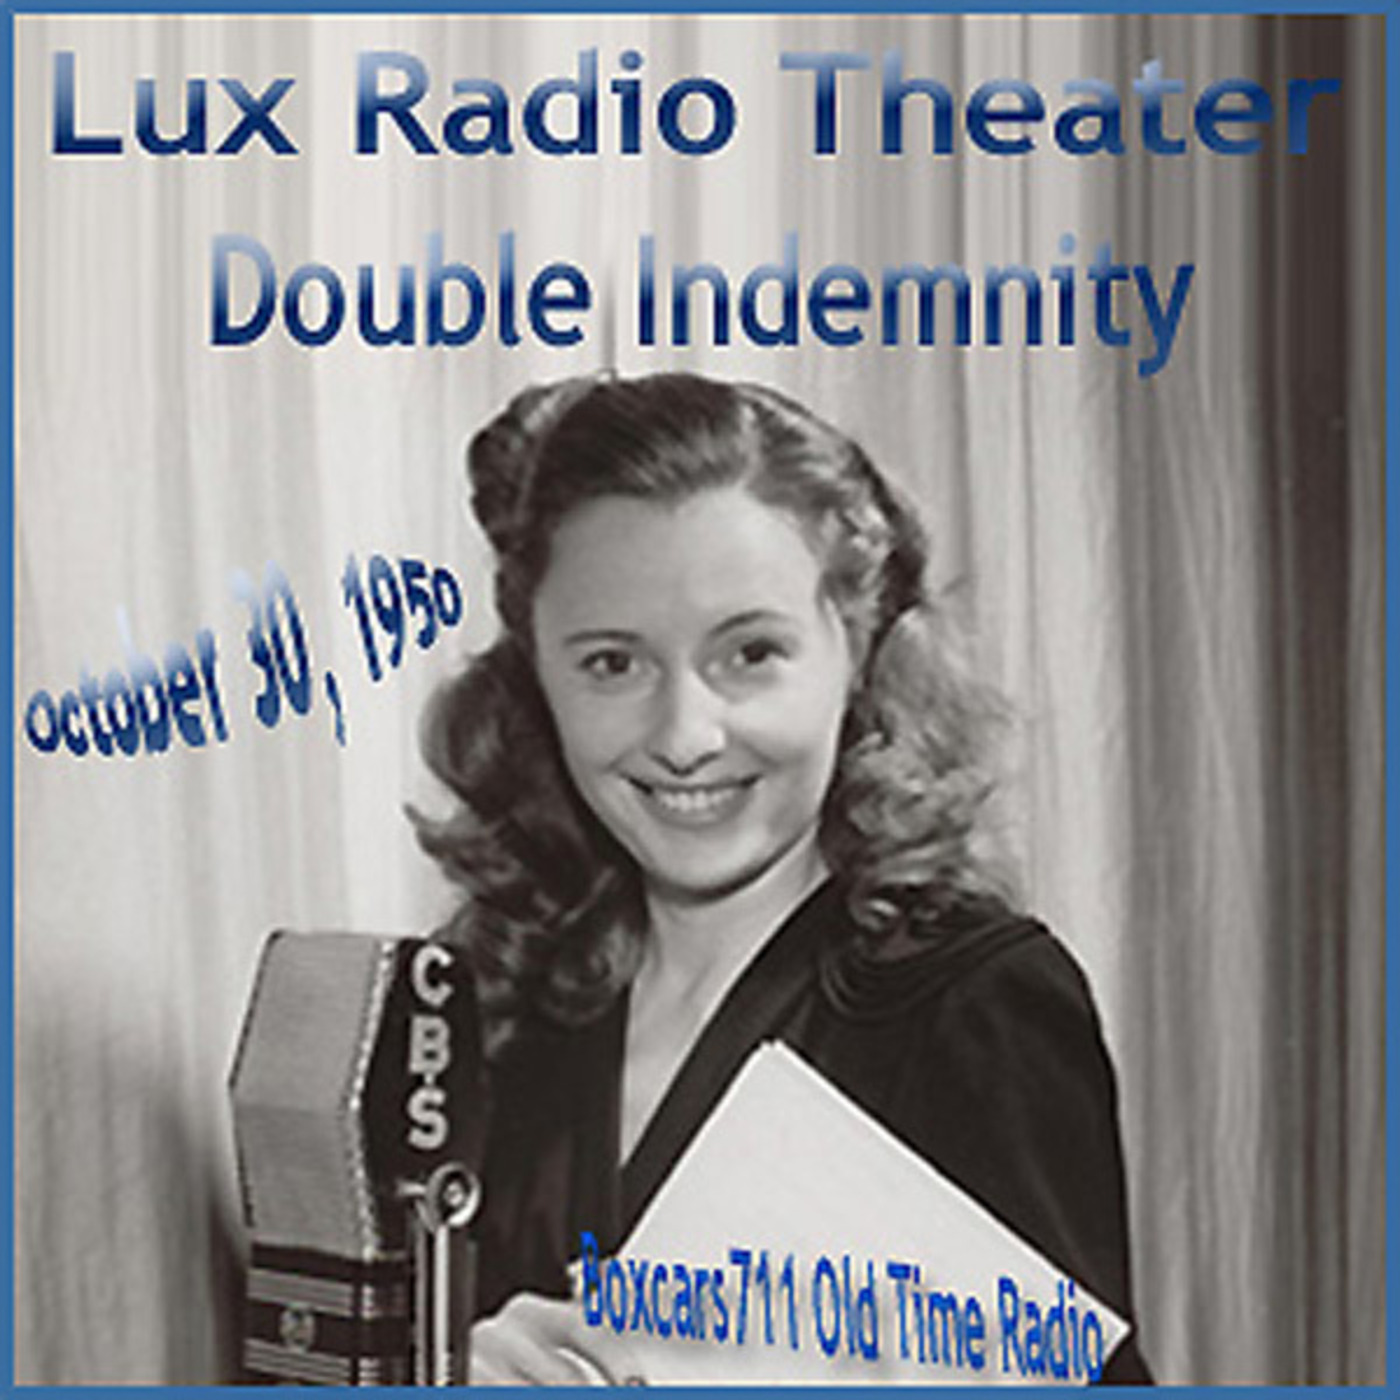 Episode 9476: The Lux Radio Theater - 